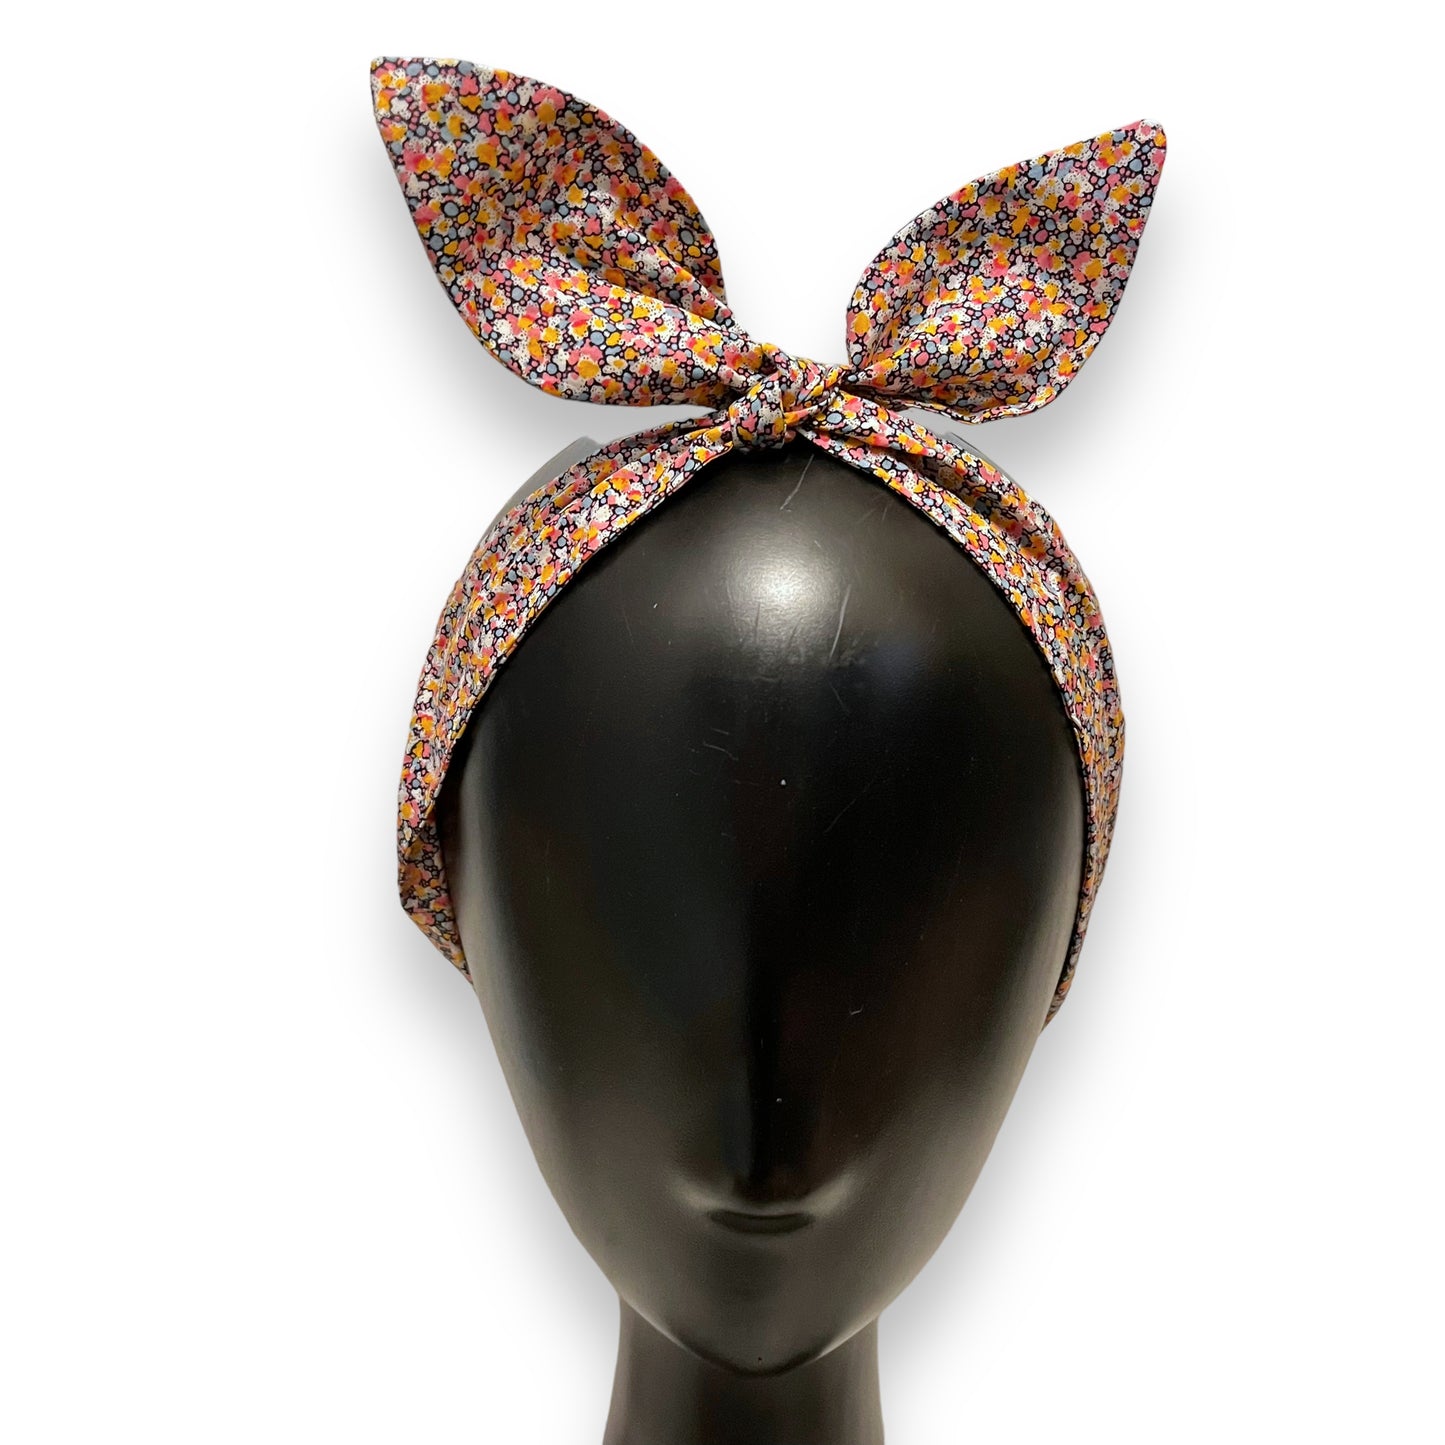 Soft Knotted Hairband - Liberty Pepper